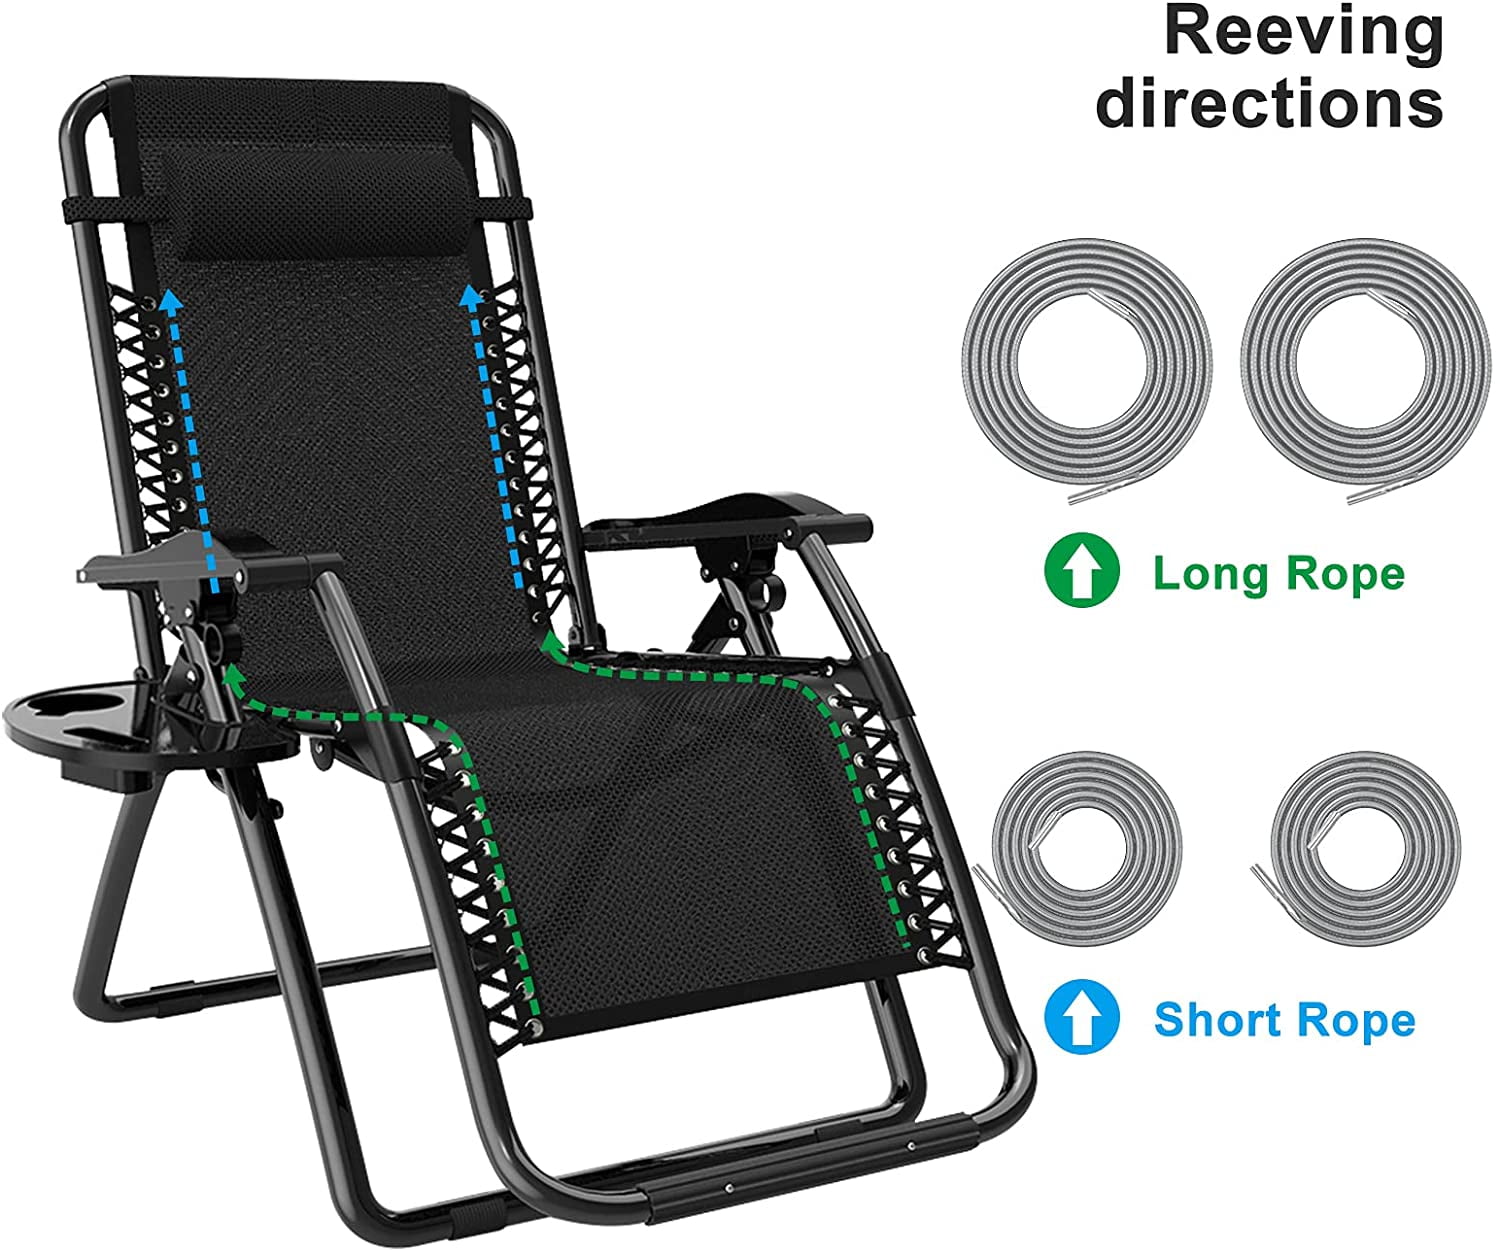 Universal Repair Cord Kit Recliners Repair Cord Replacement Laces for Relaxation Lounge Weightless Sun Lounge Relaxation Lounge Yiezio Replacement Elastic Cords for Zero Gravity Chair 4 Cords 